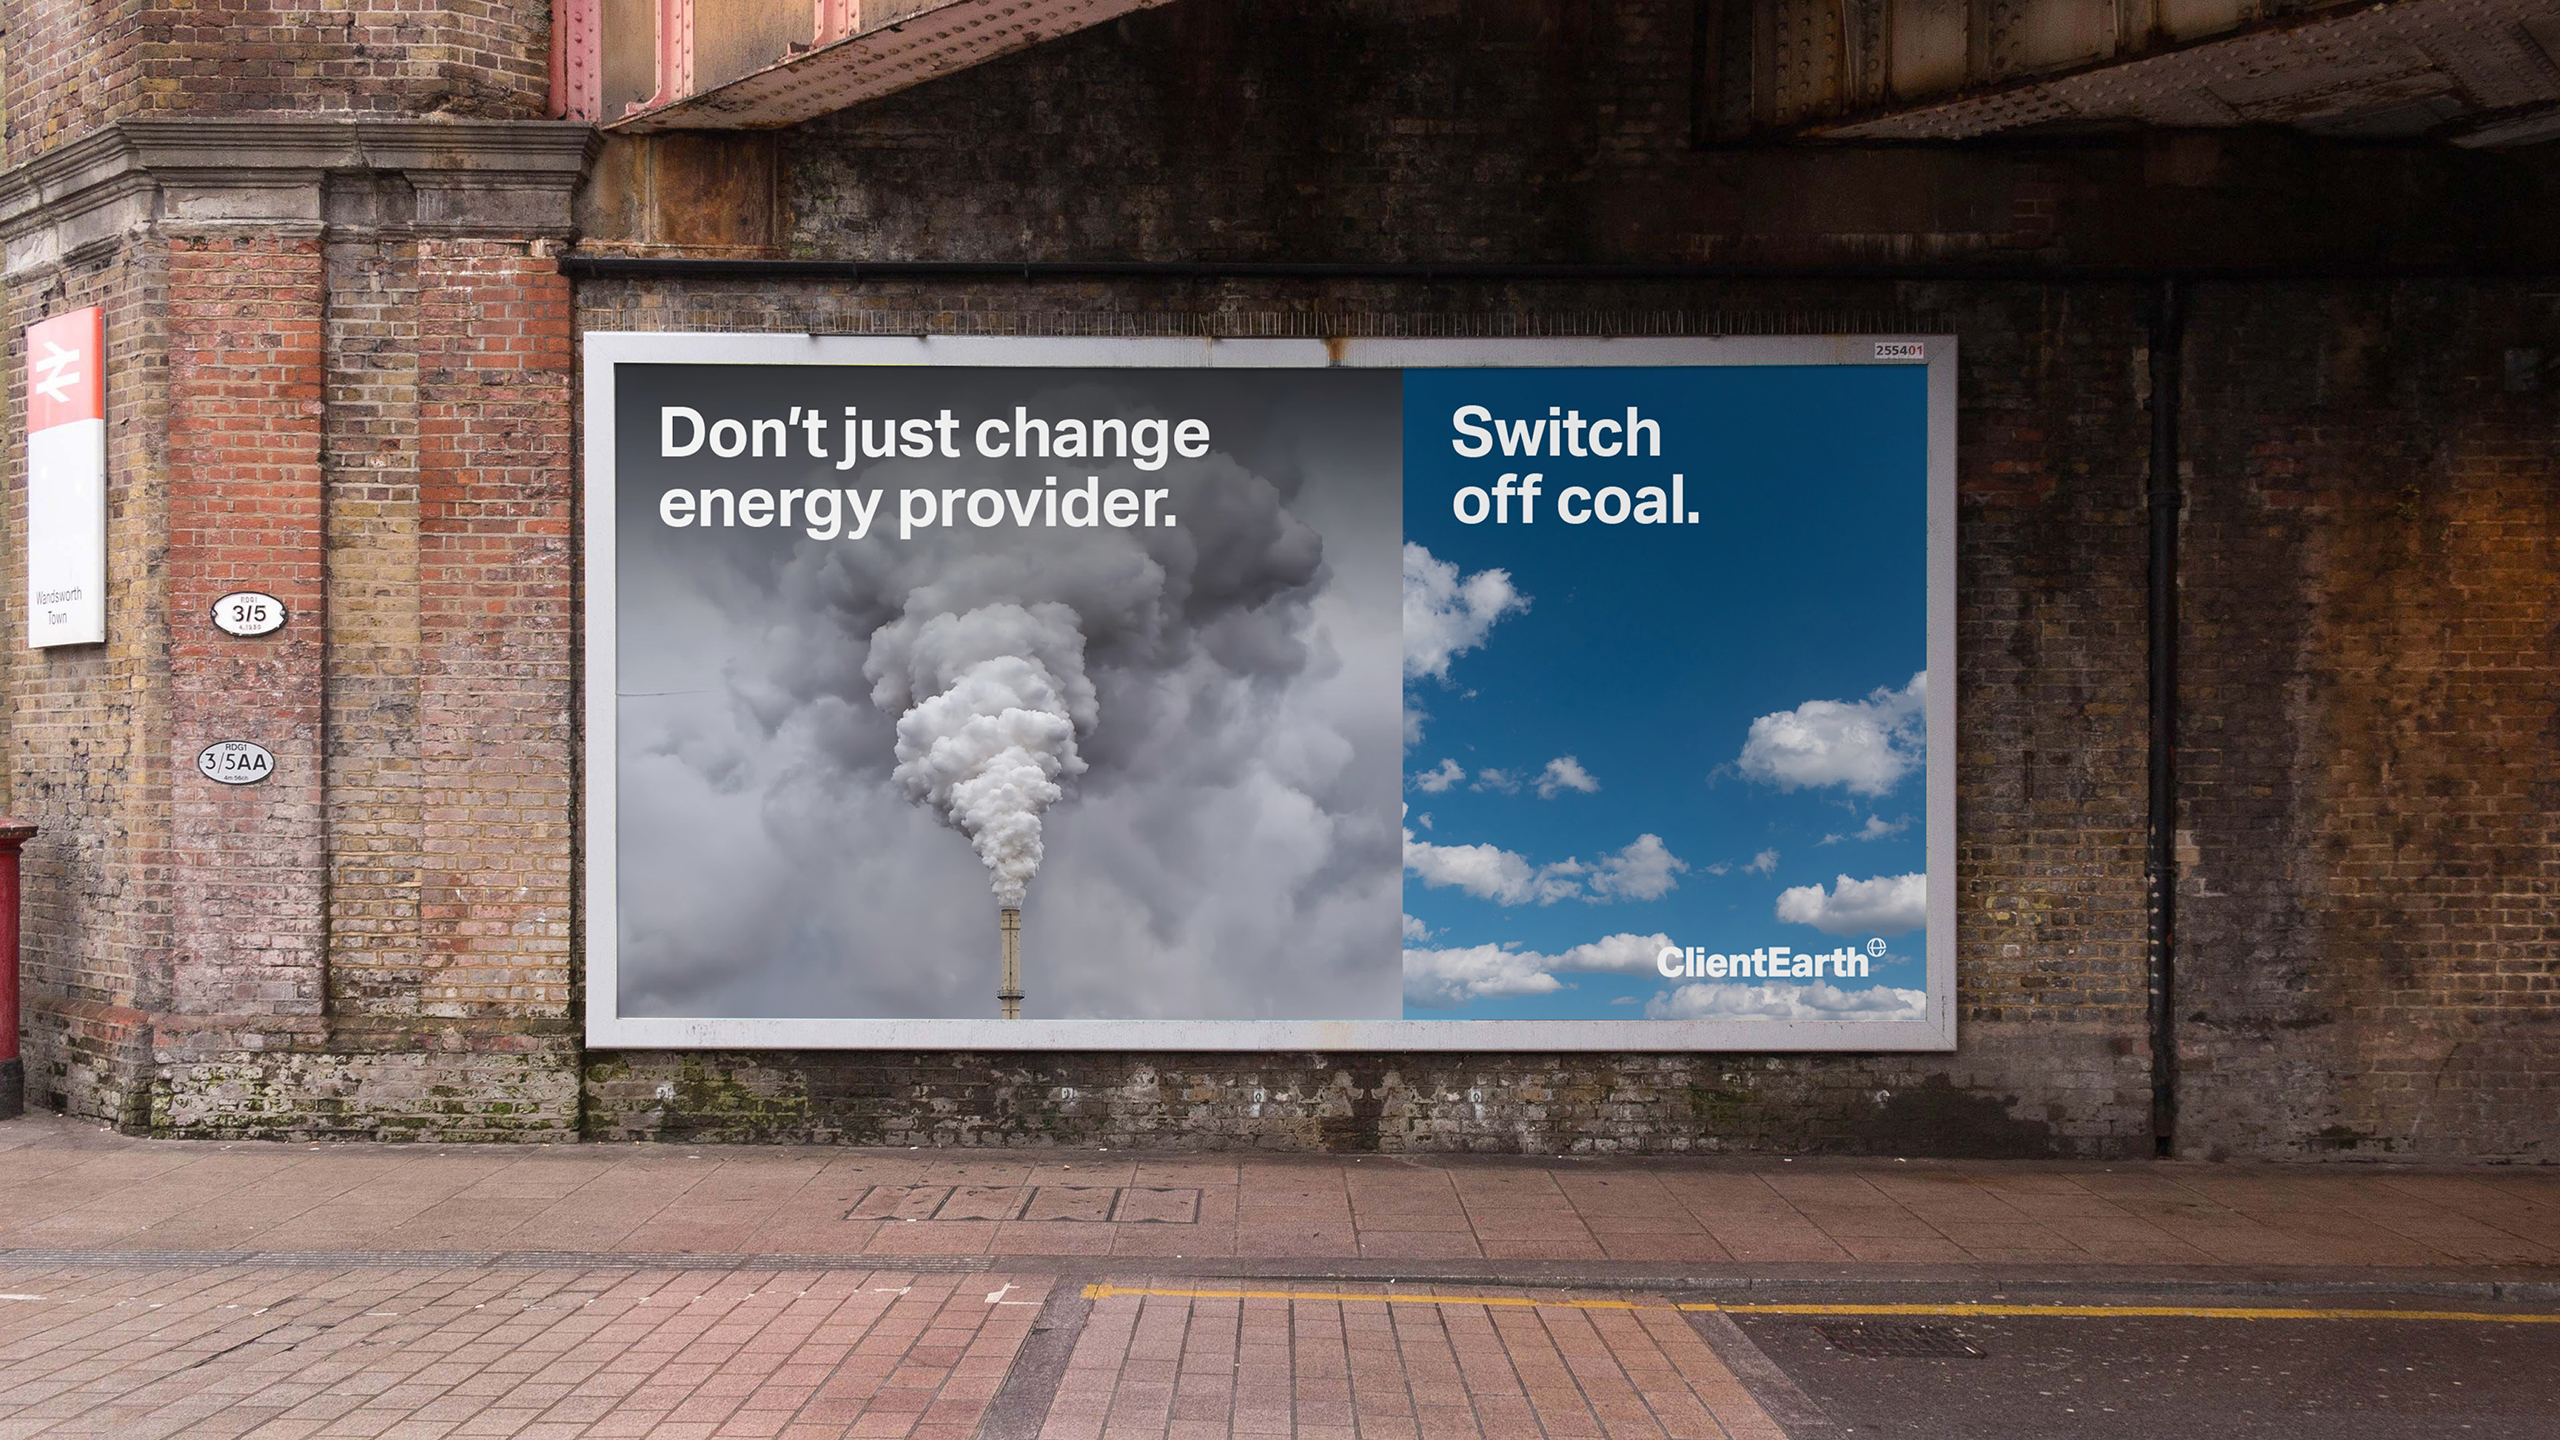 ClientEarth outdoor campaign.
Strategy and creative direction by Apropos. Design and art direction by Erica Dorn. Strategy and copywriting by Clare Aitken.